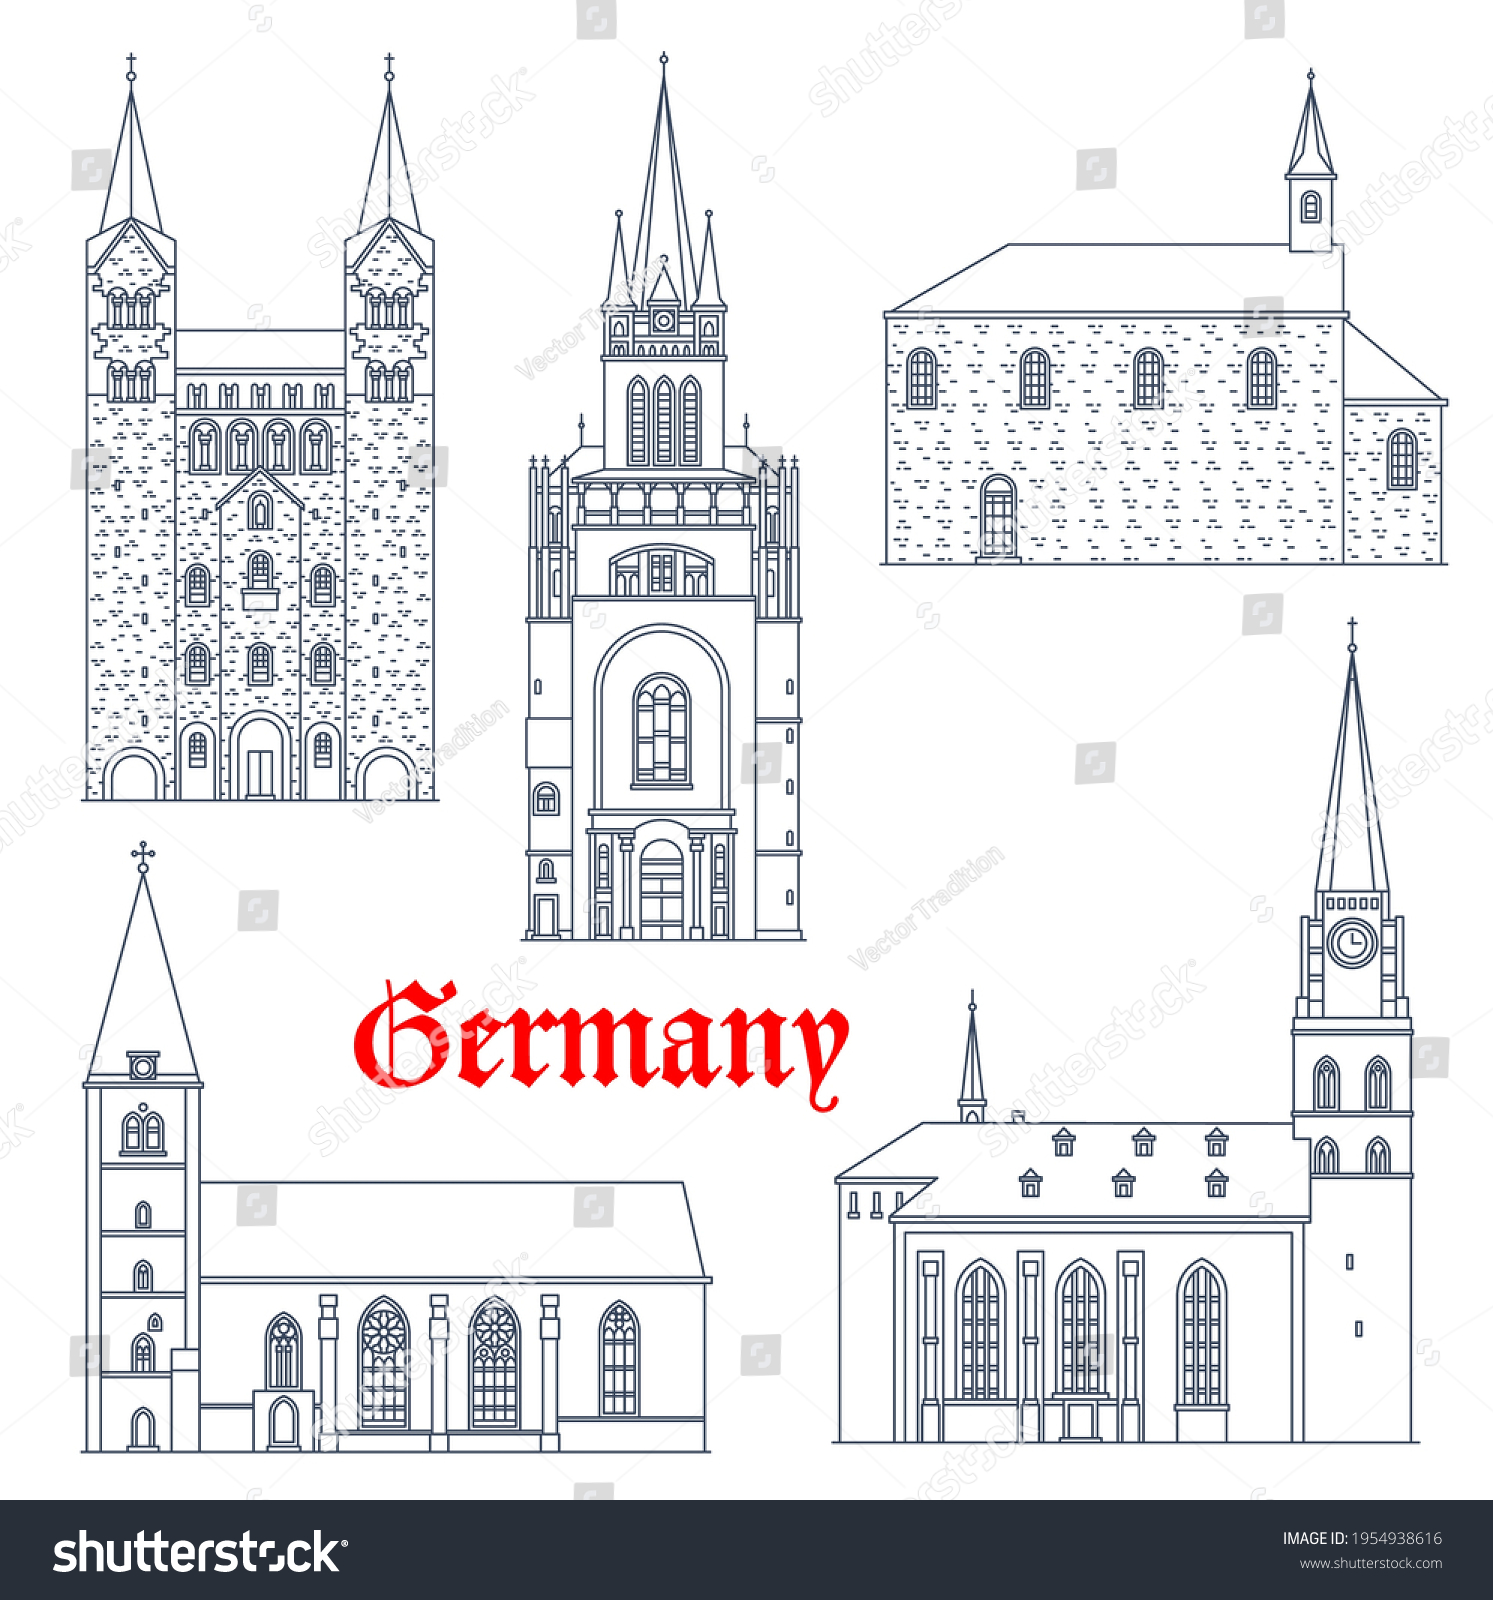 SVG of Germany travel landmarks, gothic castles and cathedrals vector icons, Germany buildings. St Maria church in Lemgo and Bielfeld, Hoxter Corvey Abbey, Saint Nikolai chapel in Soest and Pfalz in Aachen svg